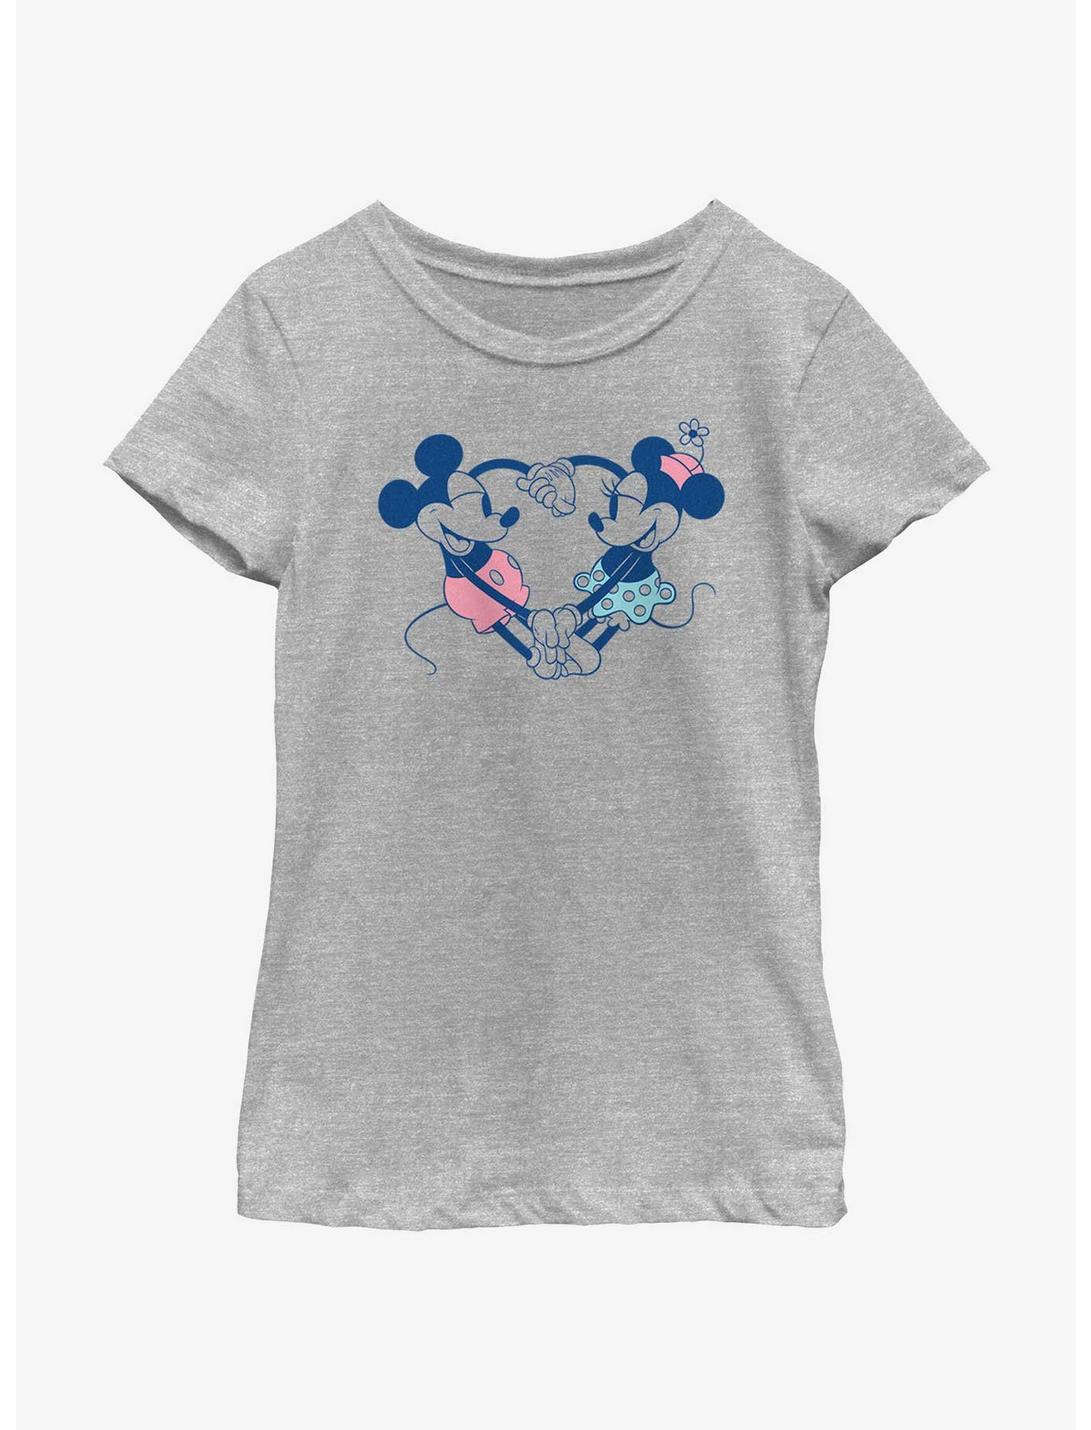 Disney Mickey Mouse Heart Pair Youth Girls T-Shirt, ATH HTR, hi-res